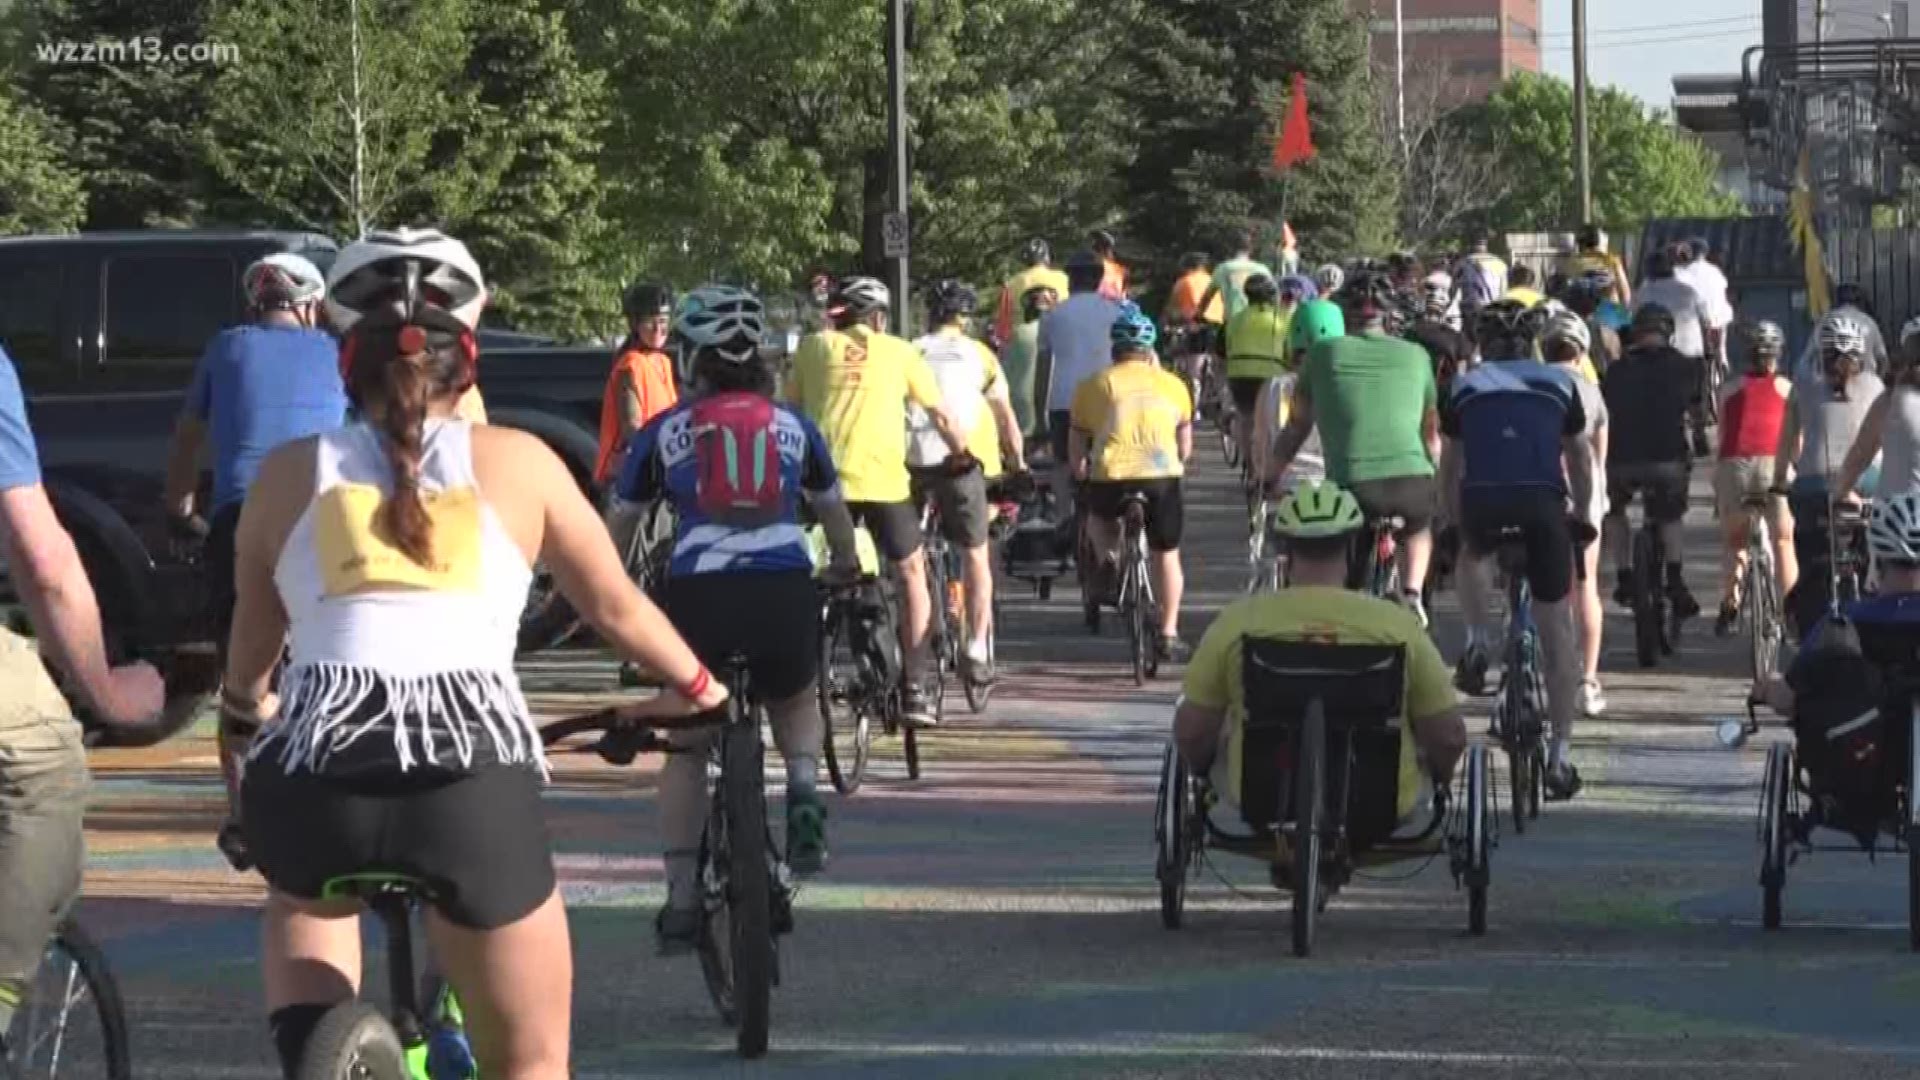 The annual events raises awareness among motorists, the community and lawmakers of the dangers that many cyclists will face on the roads and how we can all better share public roadways.